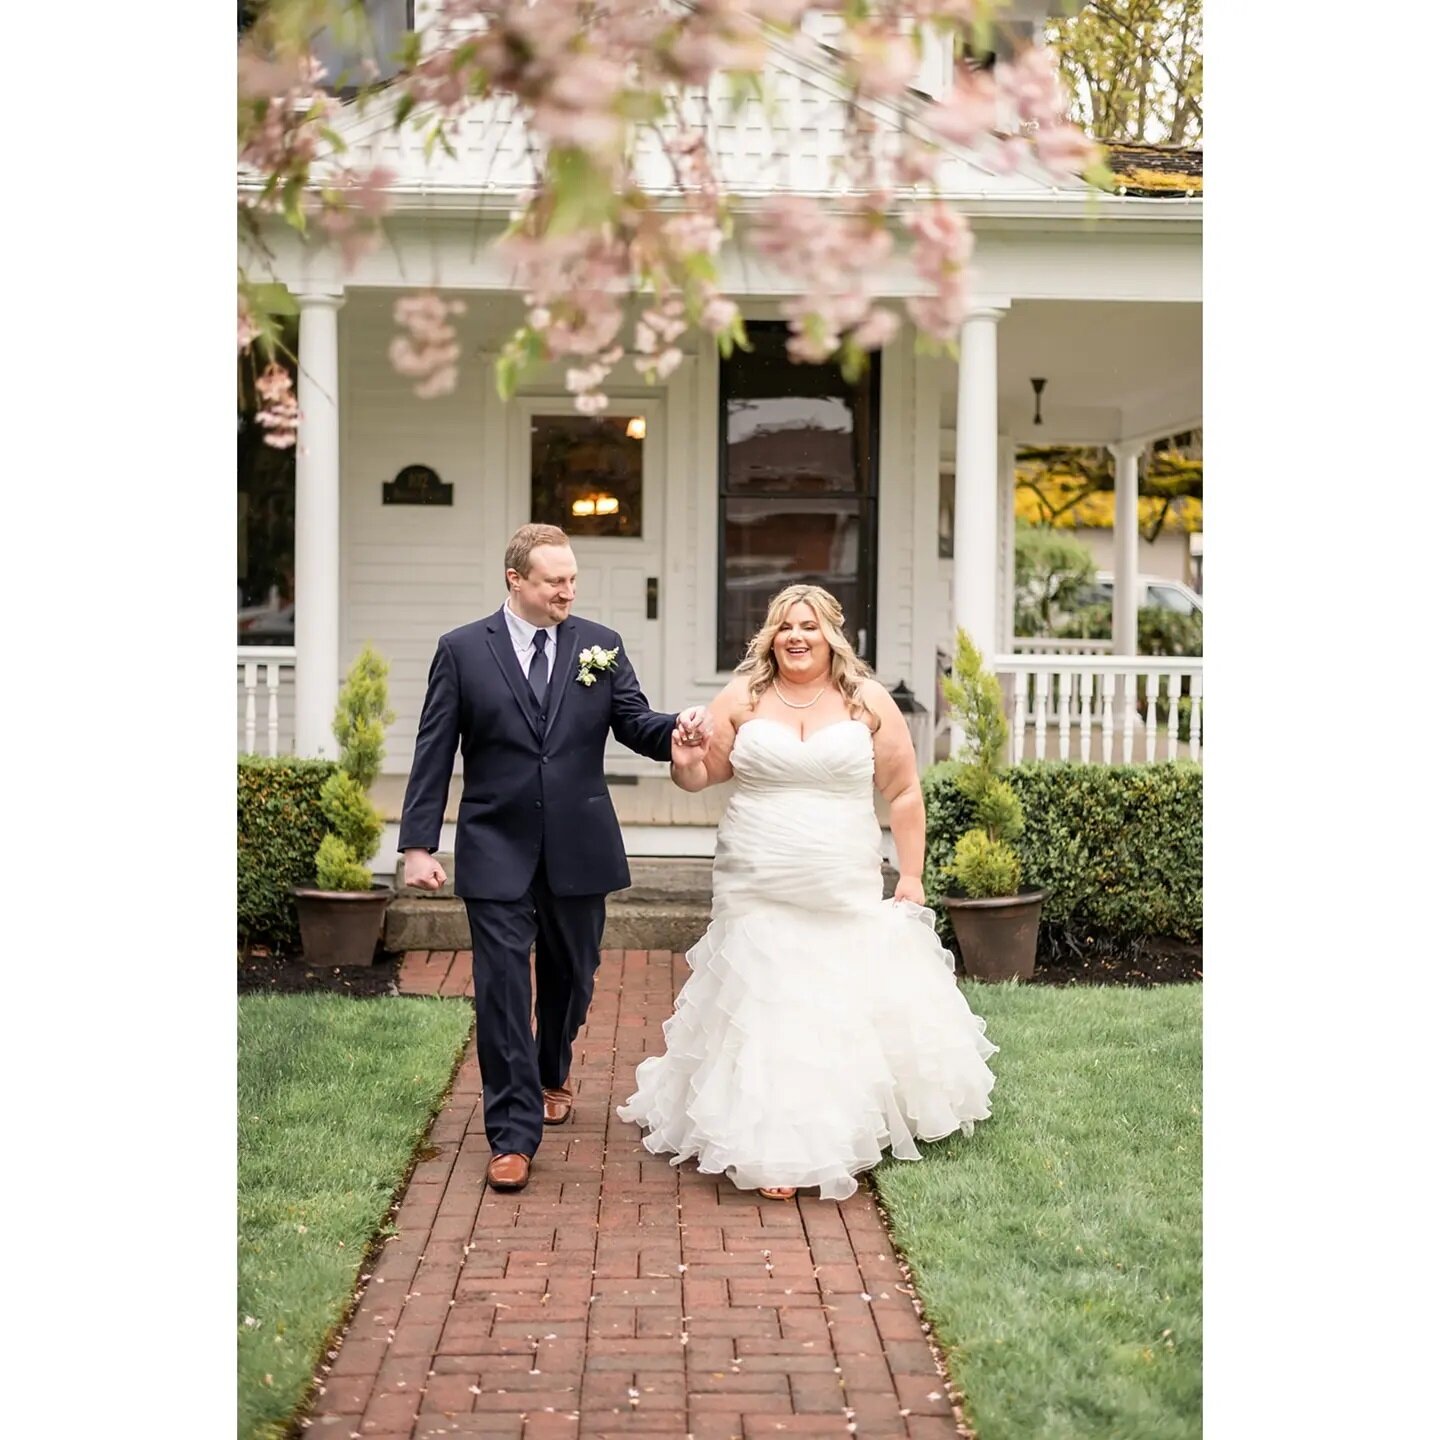 There is nothing quite like the feeling of seeing the first flowers starting to bloom in Spring 💕 Glad this tree was in bloom at @ortingmanor for this beautiful April wedding!